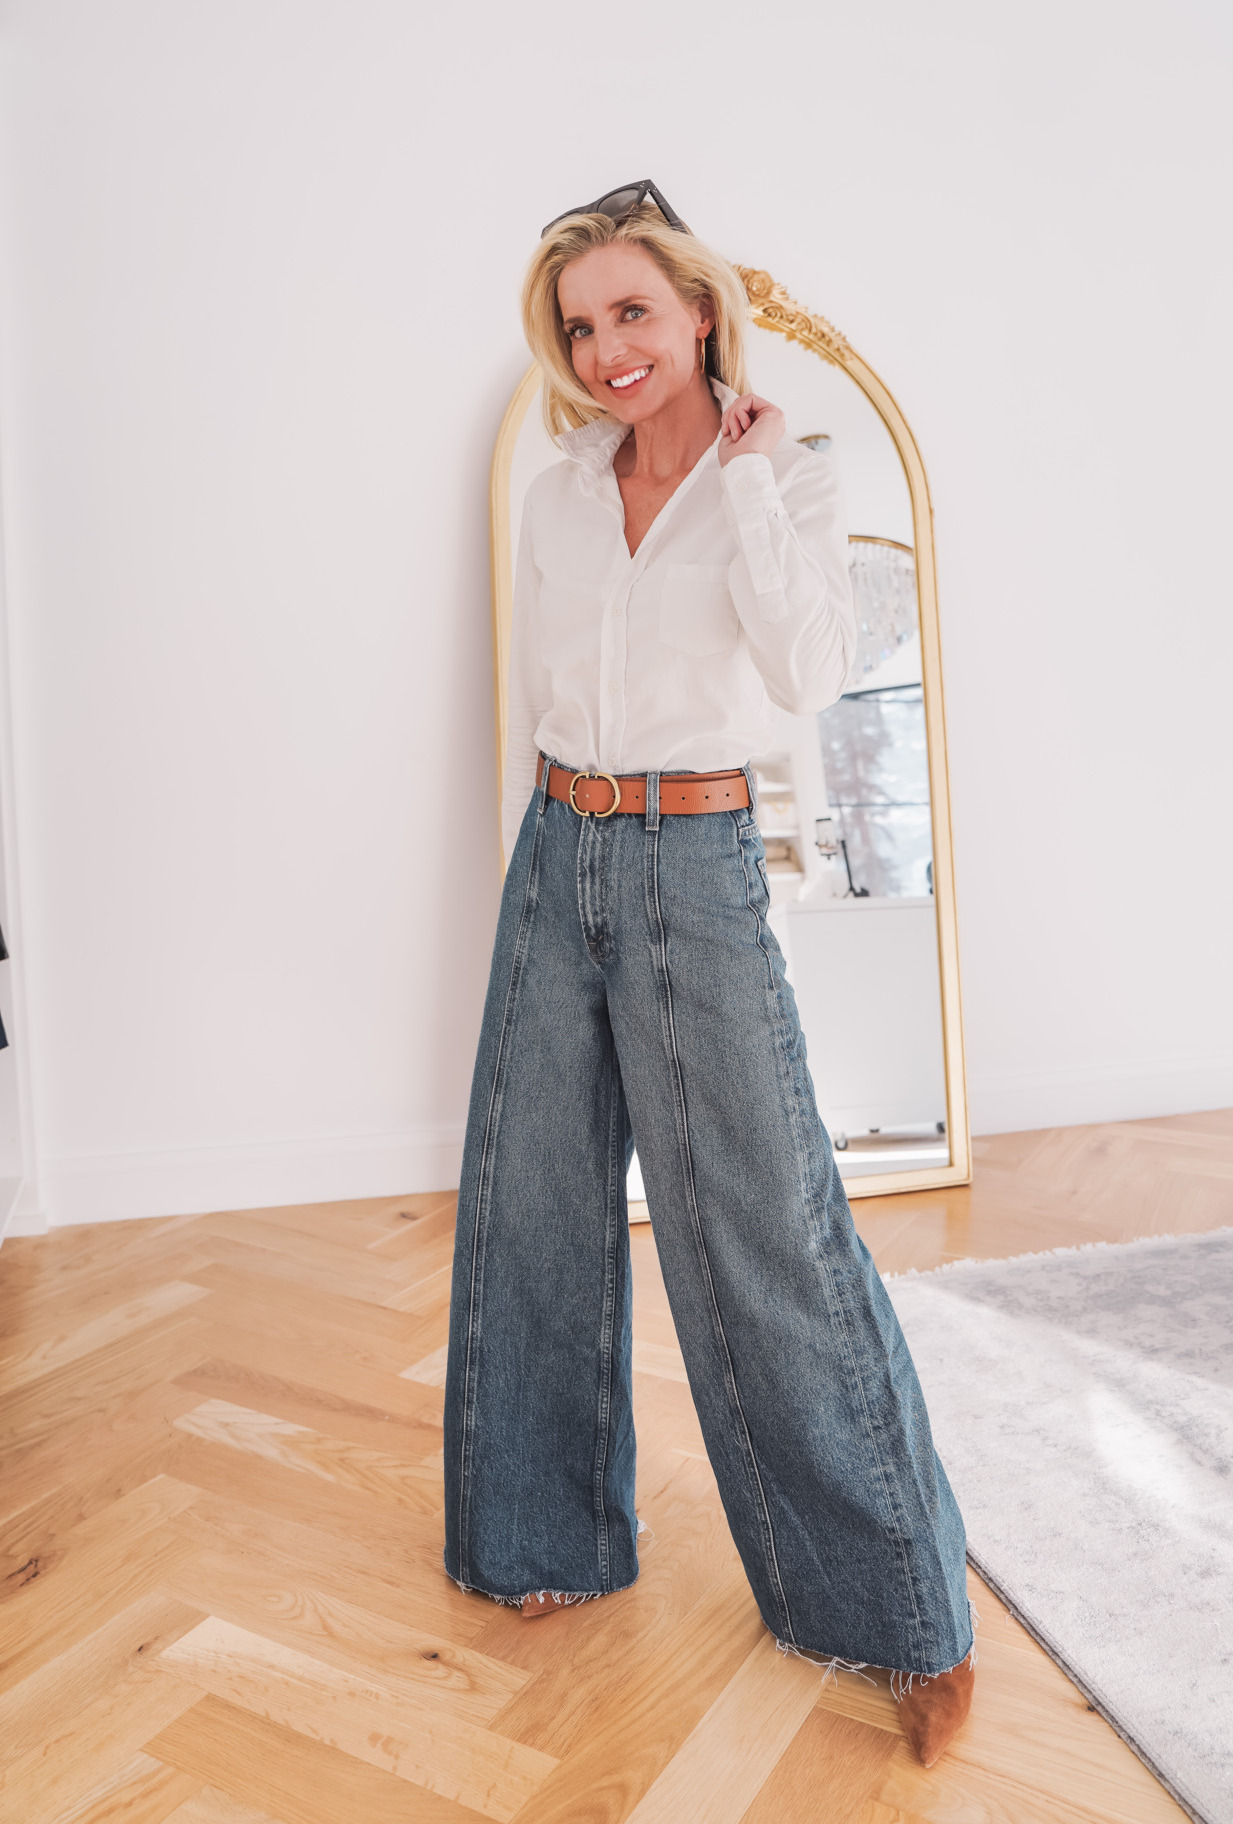 3 Tips on How To Look Taller in Baggy Jeans and Feel Confident